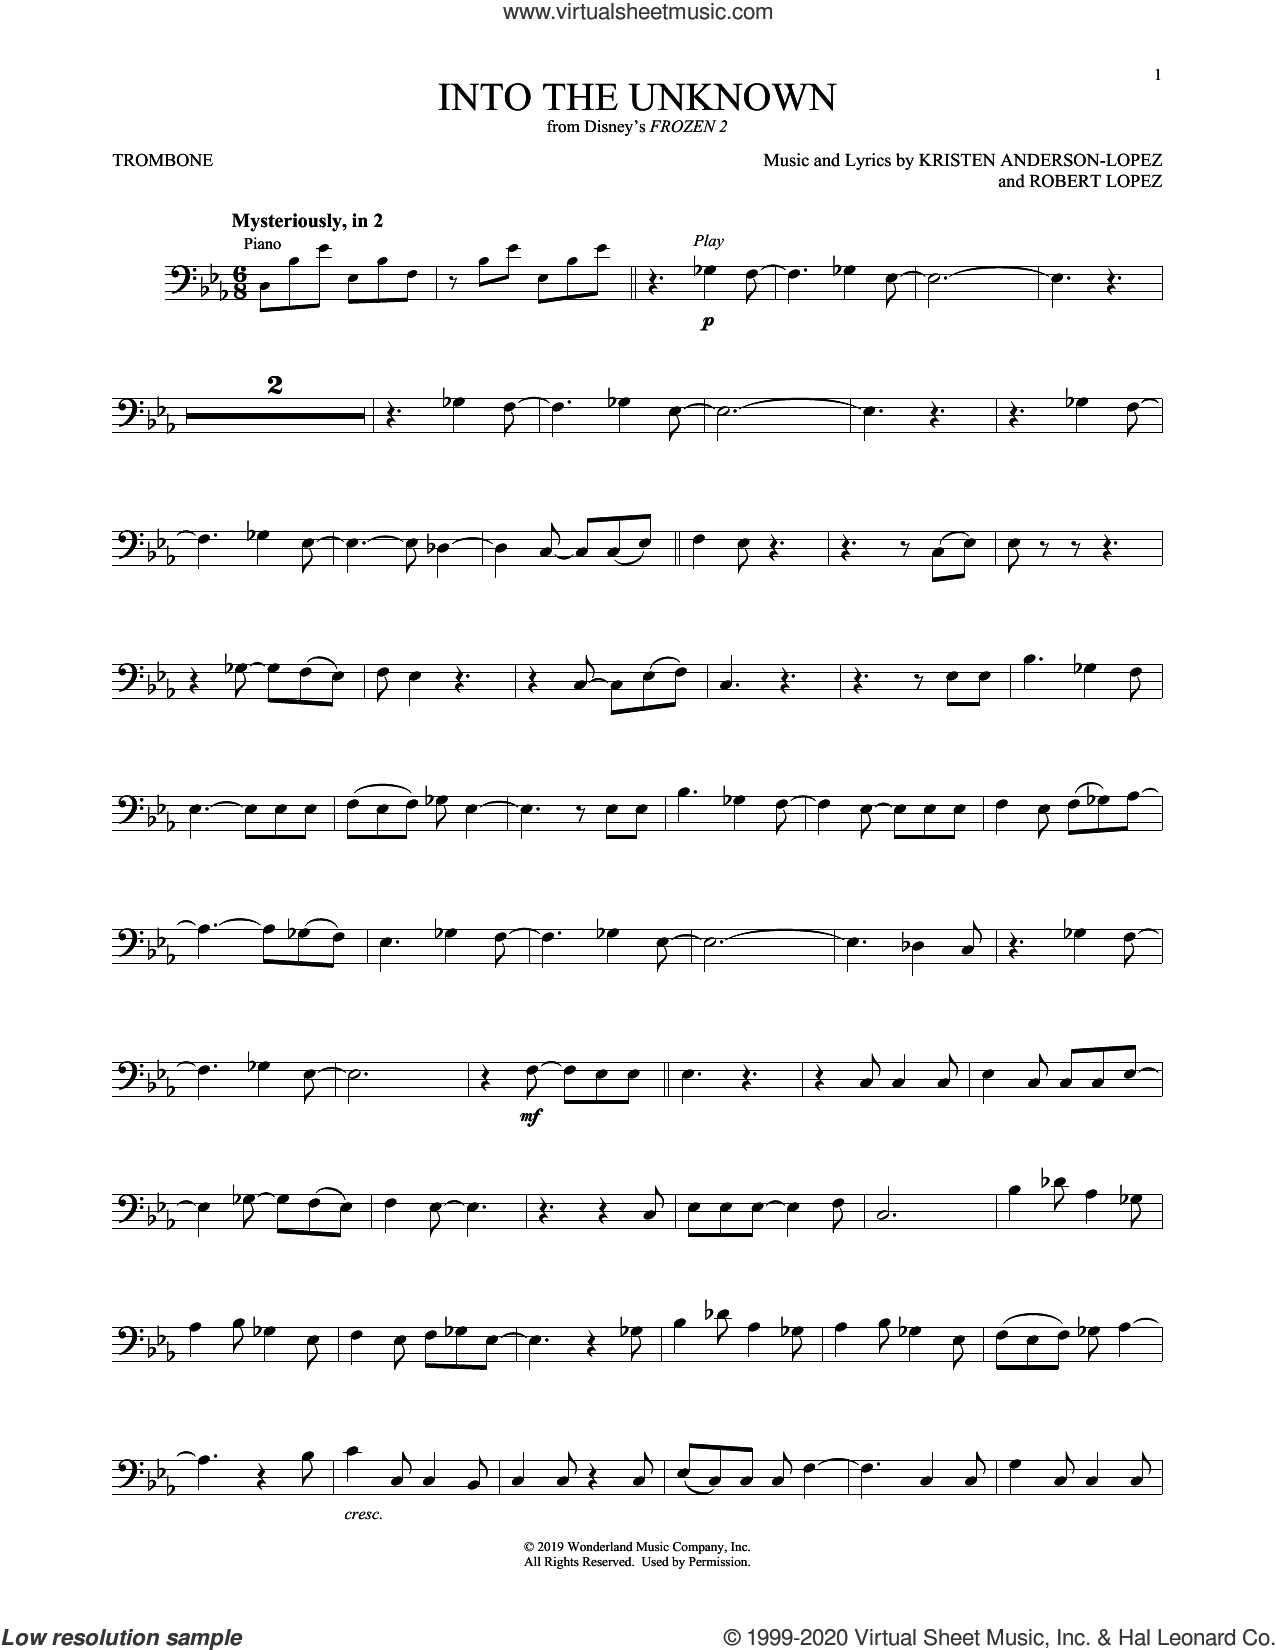 AURORA - The Unknown (from Disney's 2) sheet music for trombone solo